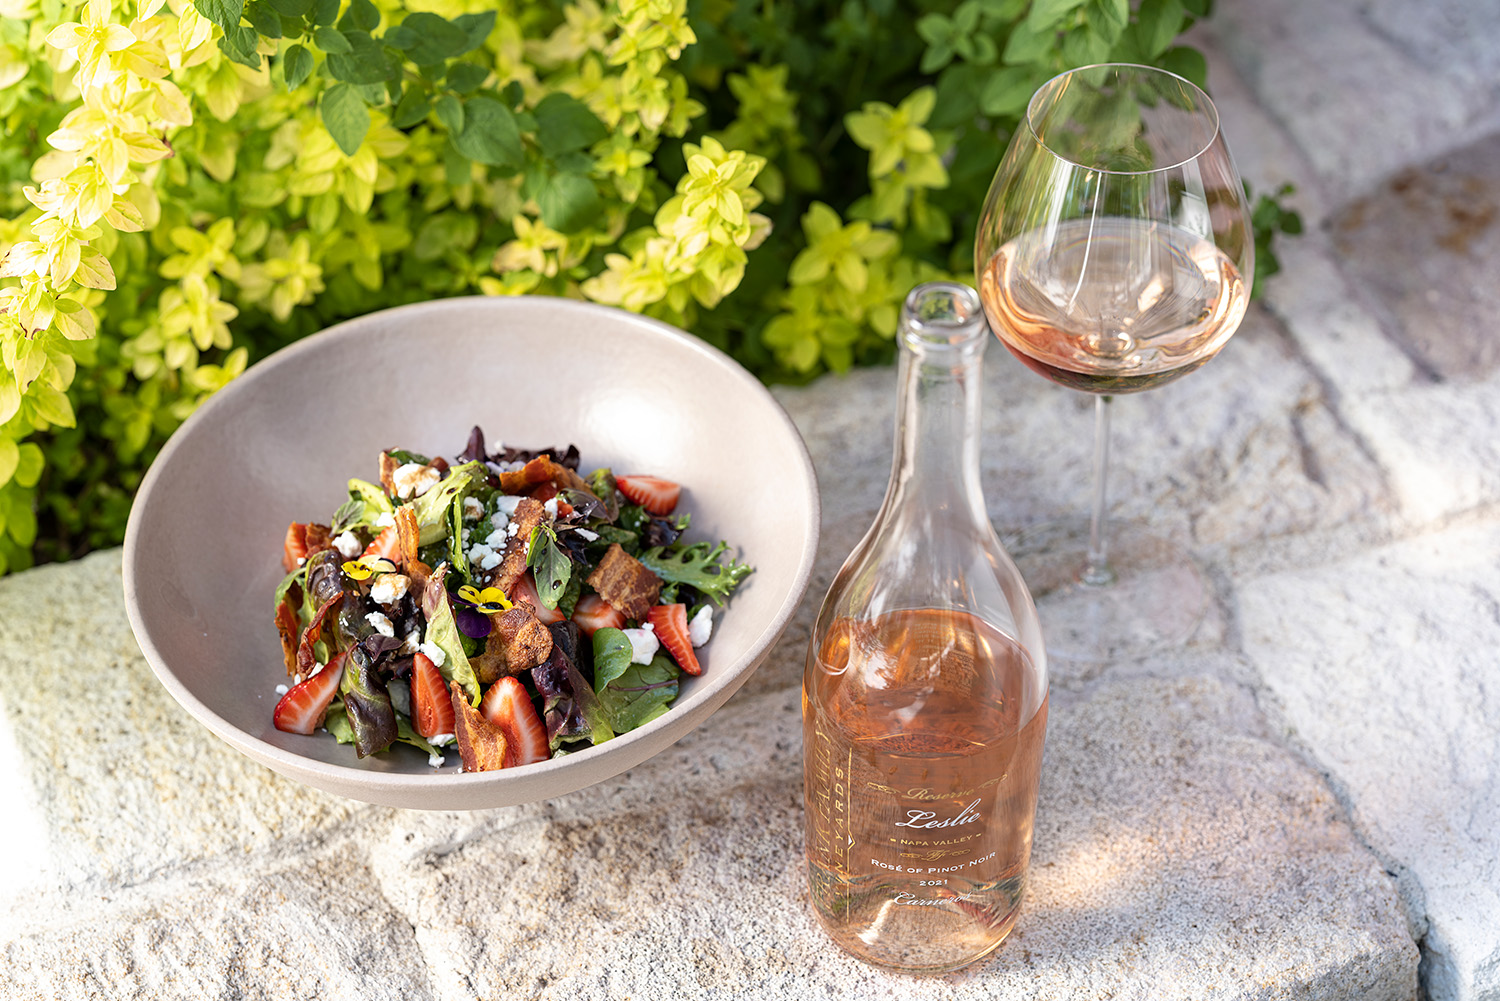 Strawberry and Bacon Salad next to a bottle and glass of Frank Family's Leslie Rosé